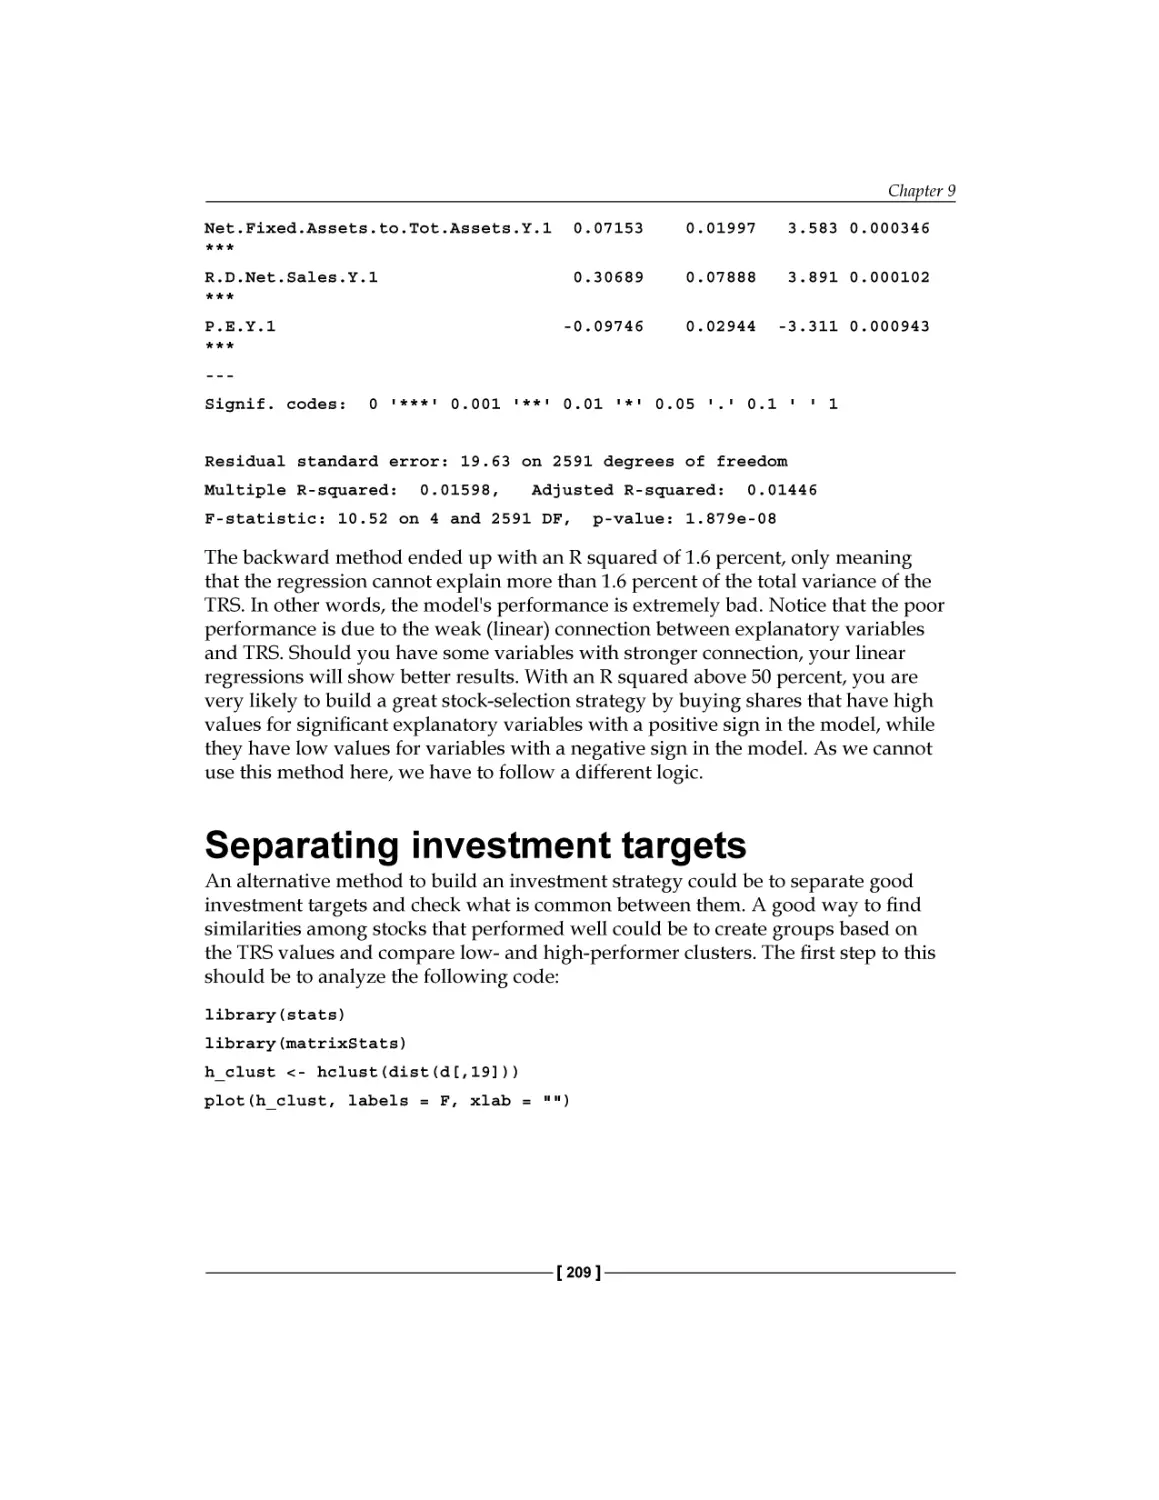 Separating investment targets